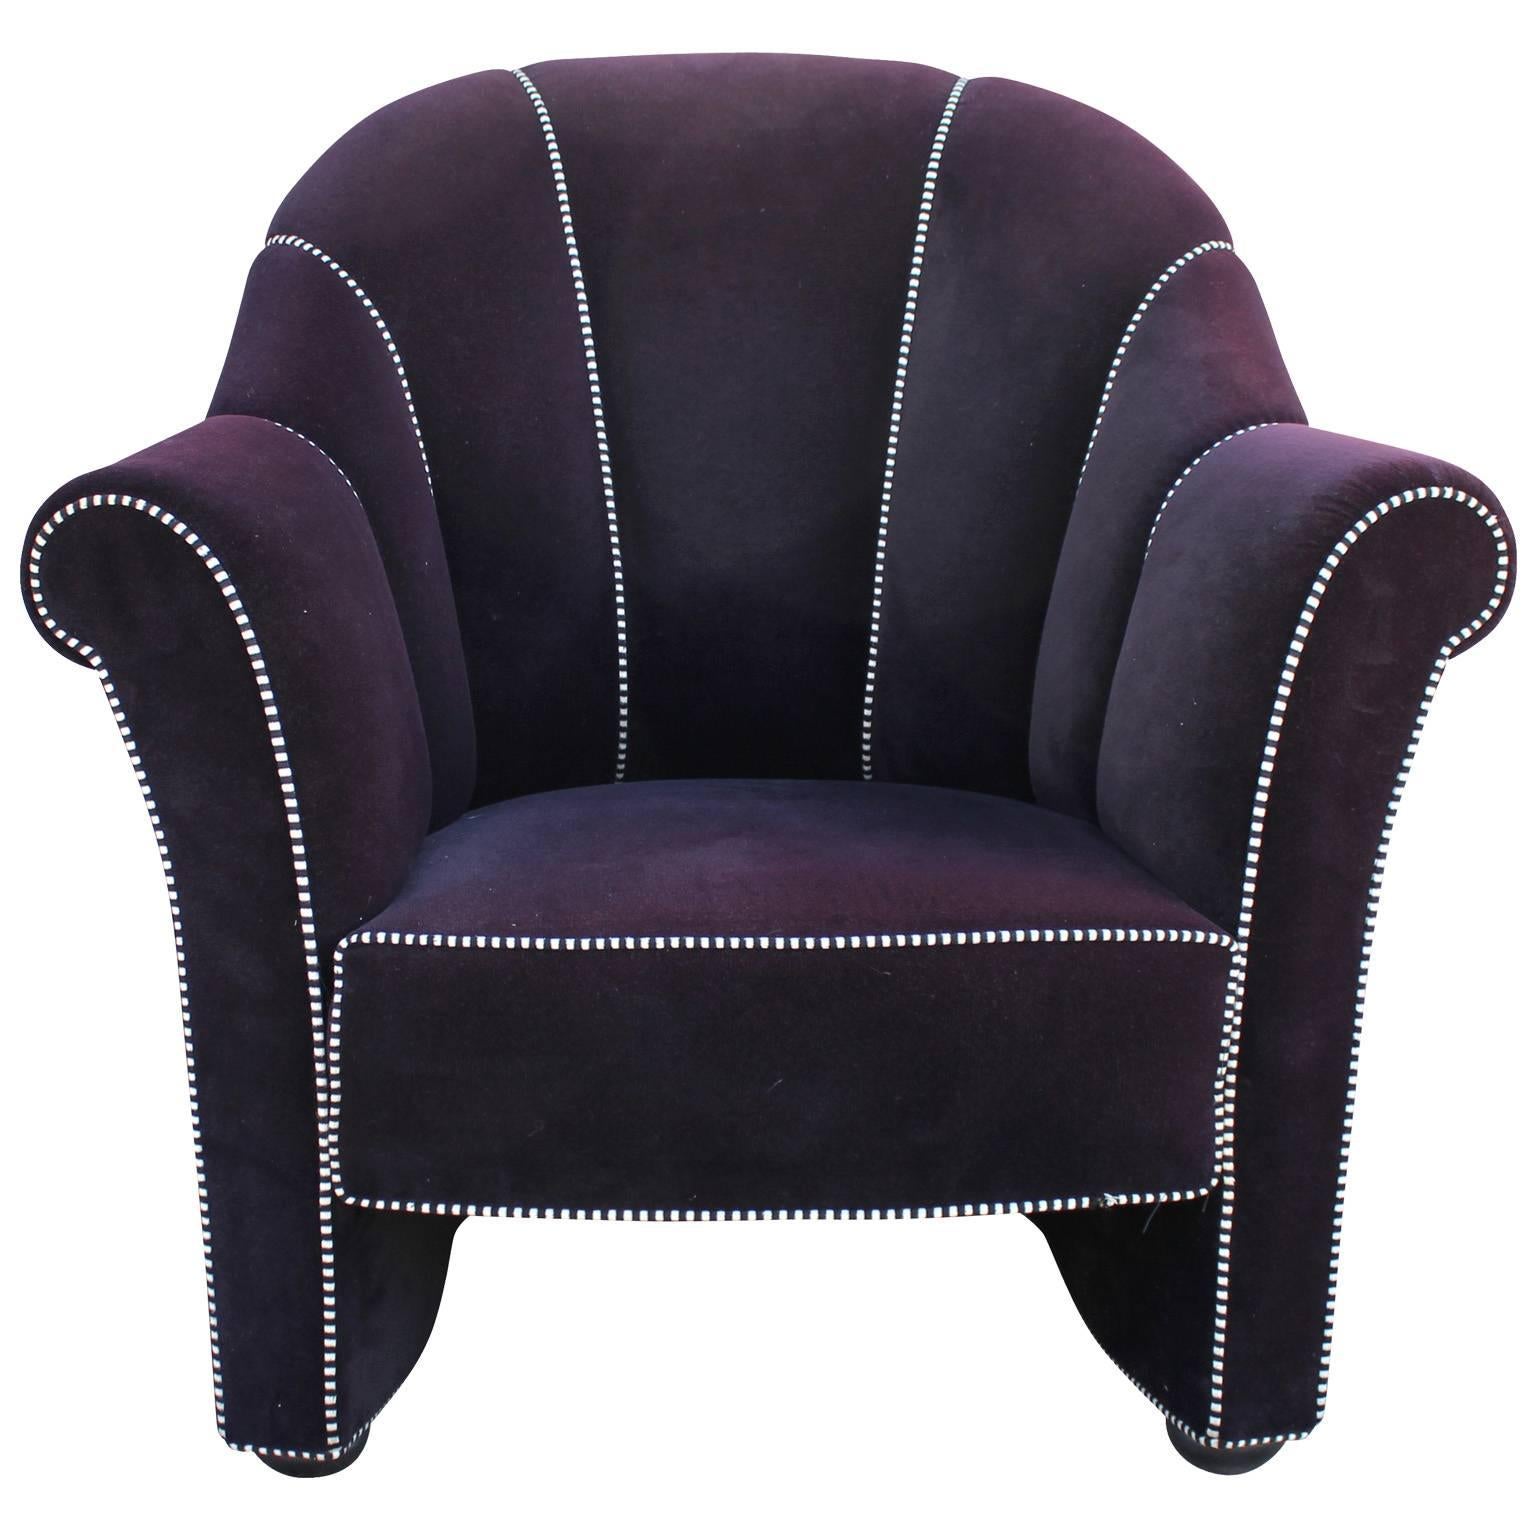 Pair of lounge chair designed by Josef Hoffmann and made by Wittmann of Austria. Originally designed for the Koller House in 1911. Eggplant purple velvet with black and white welting. Some minor damage to the welting on one chair. 